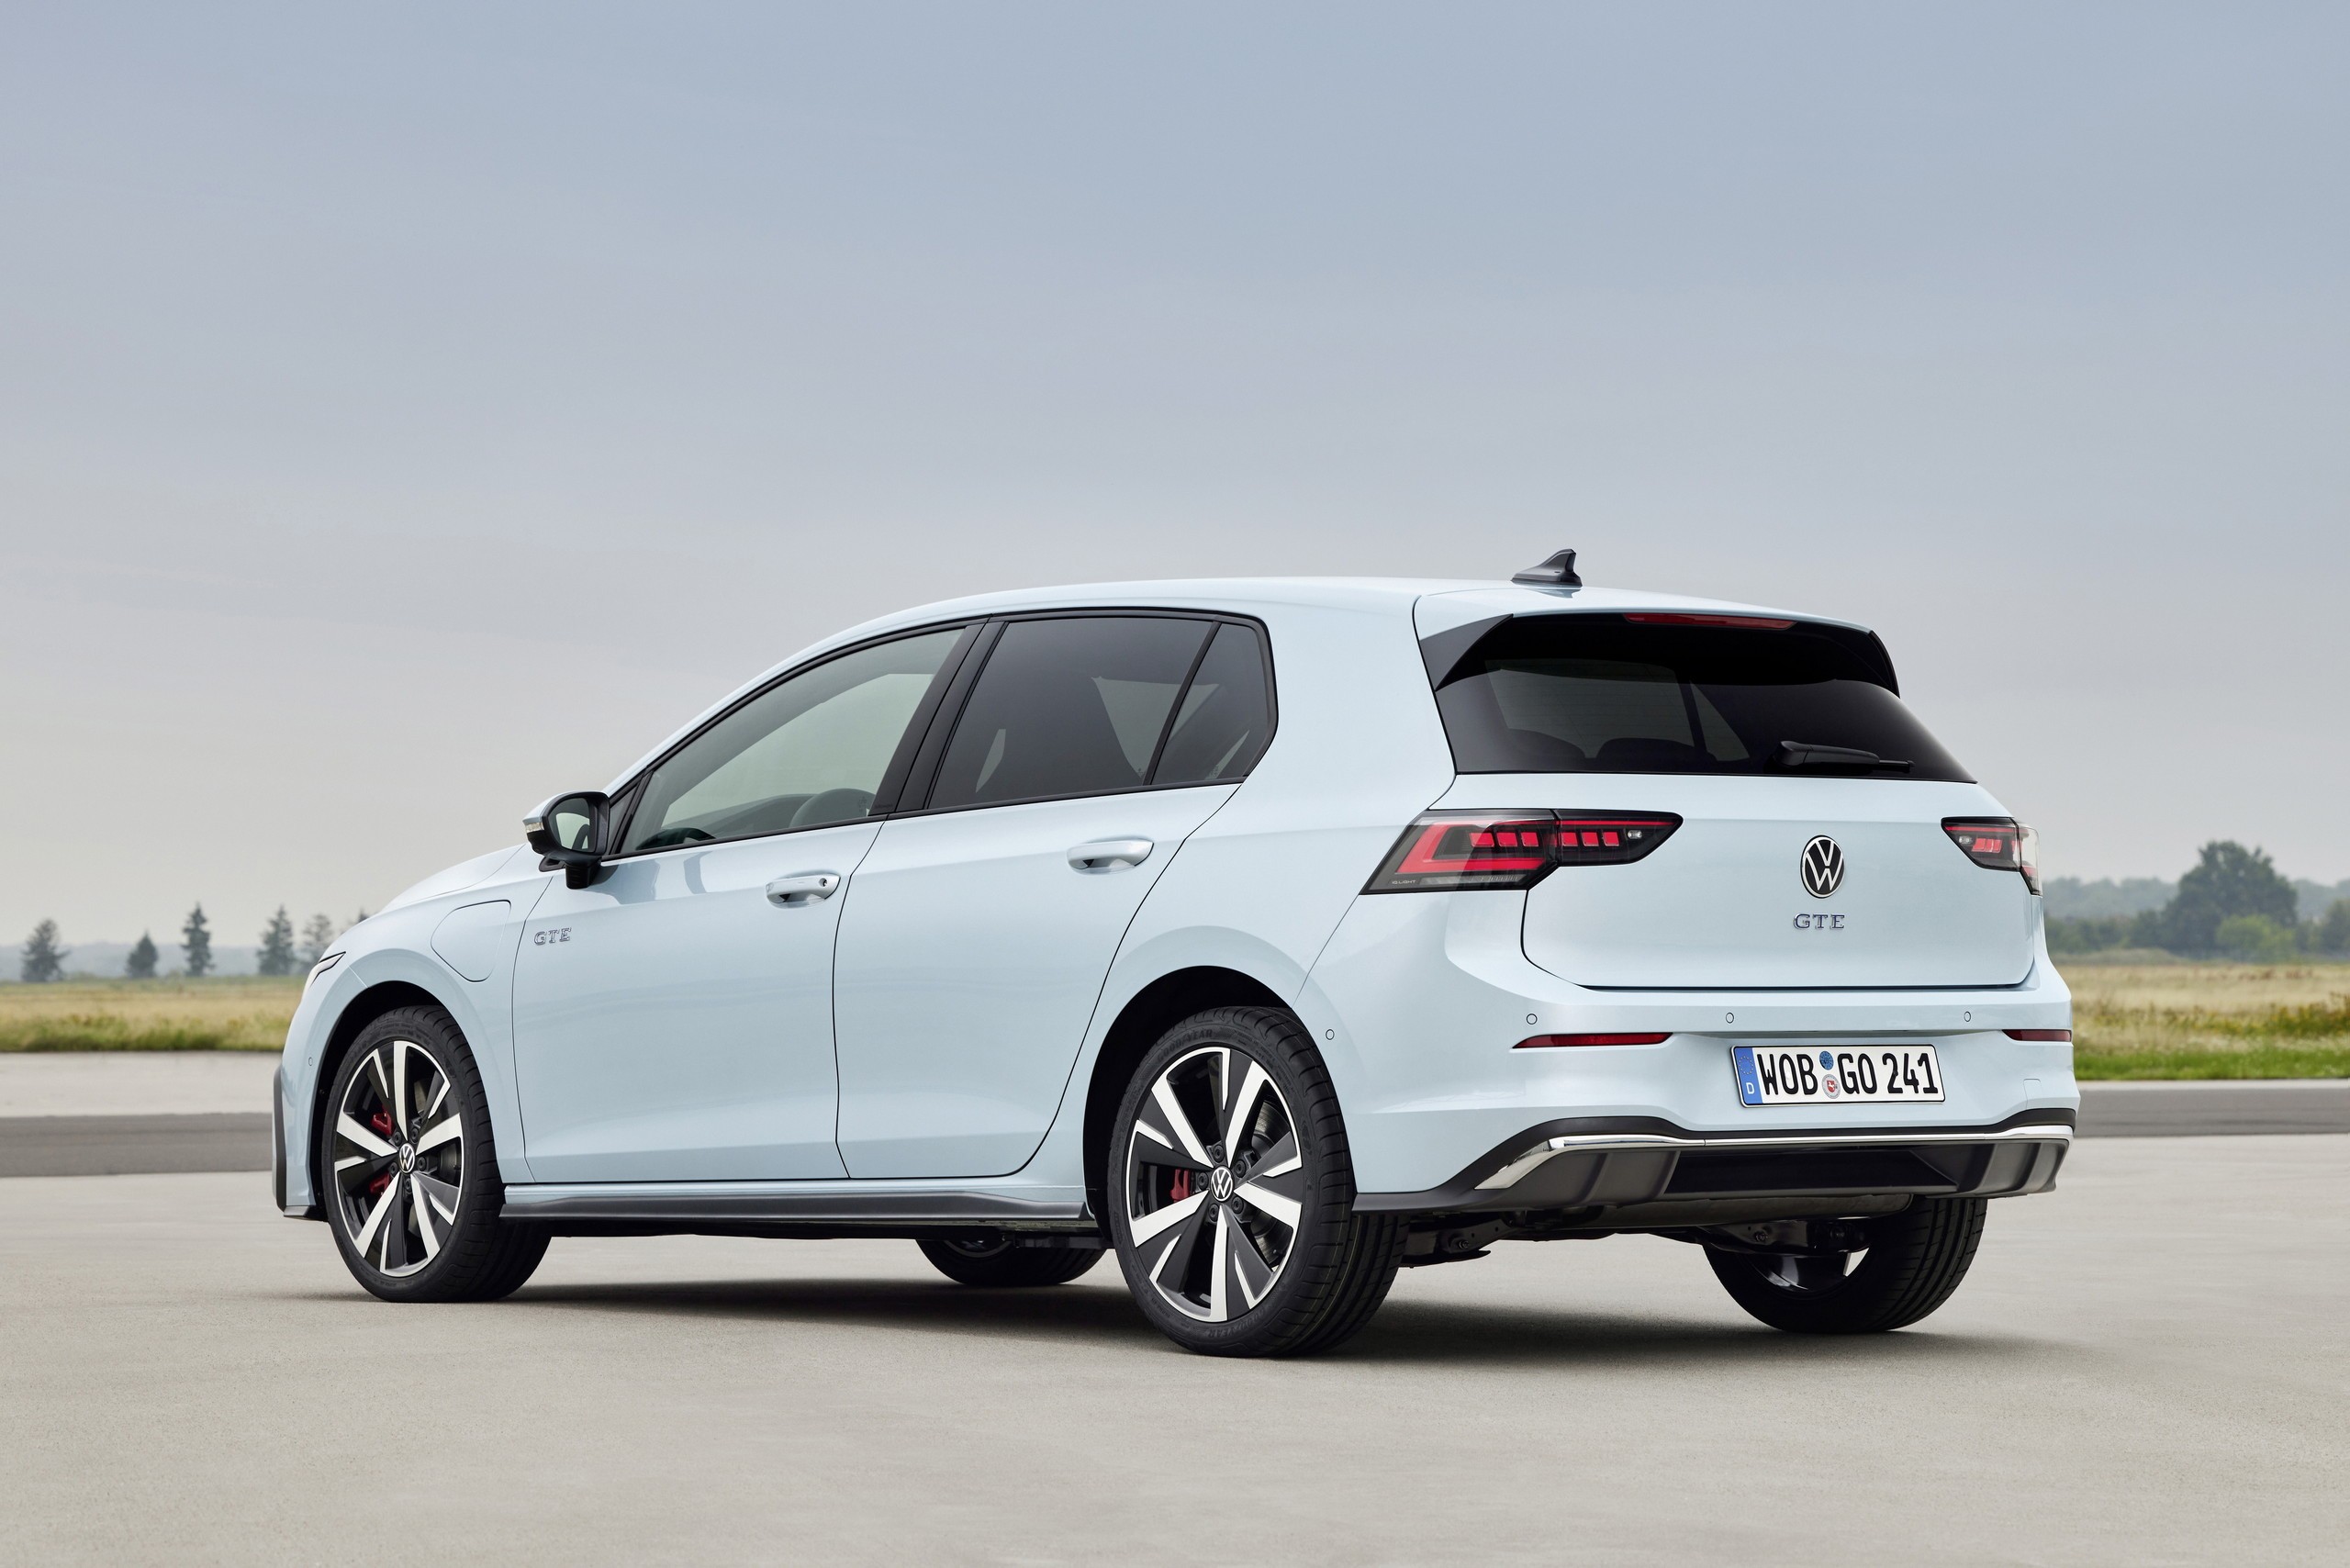 2025 VW Golf Unveiled With Subtle Design Updates, New Tech, and More